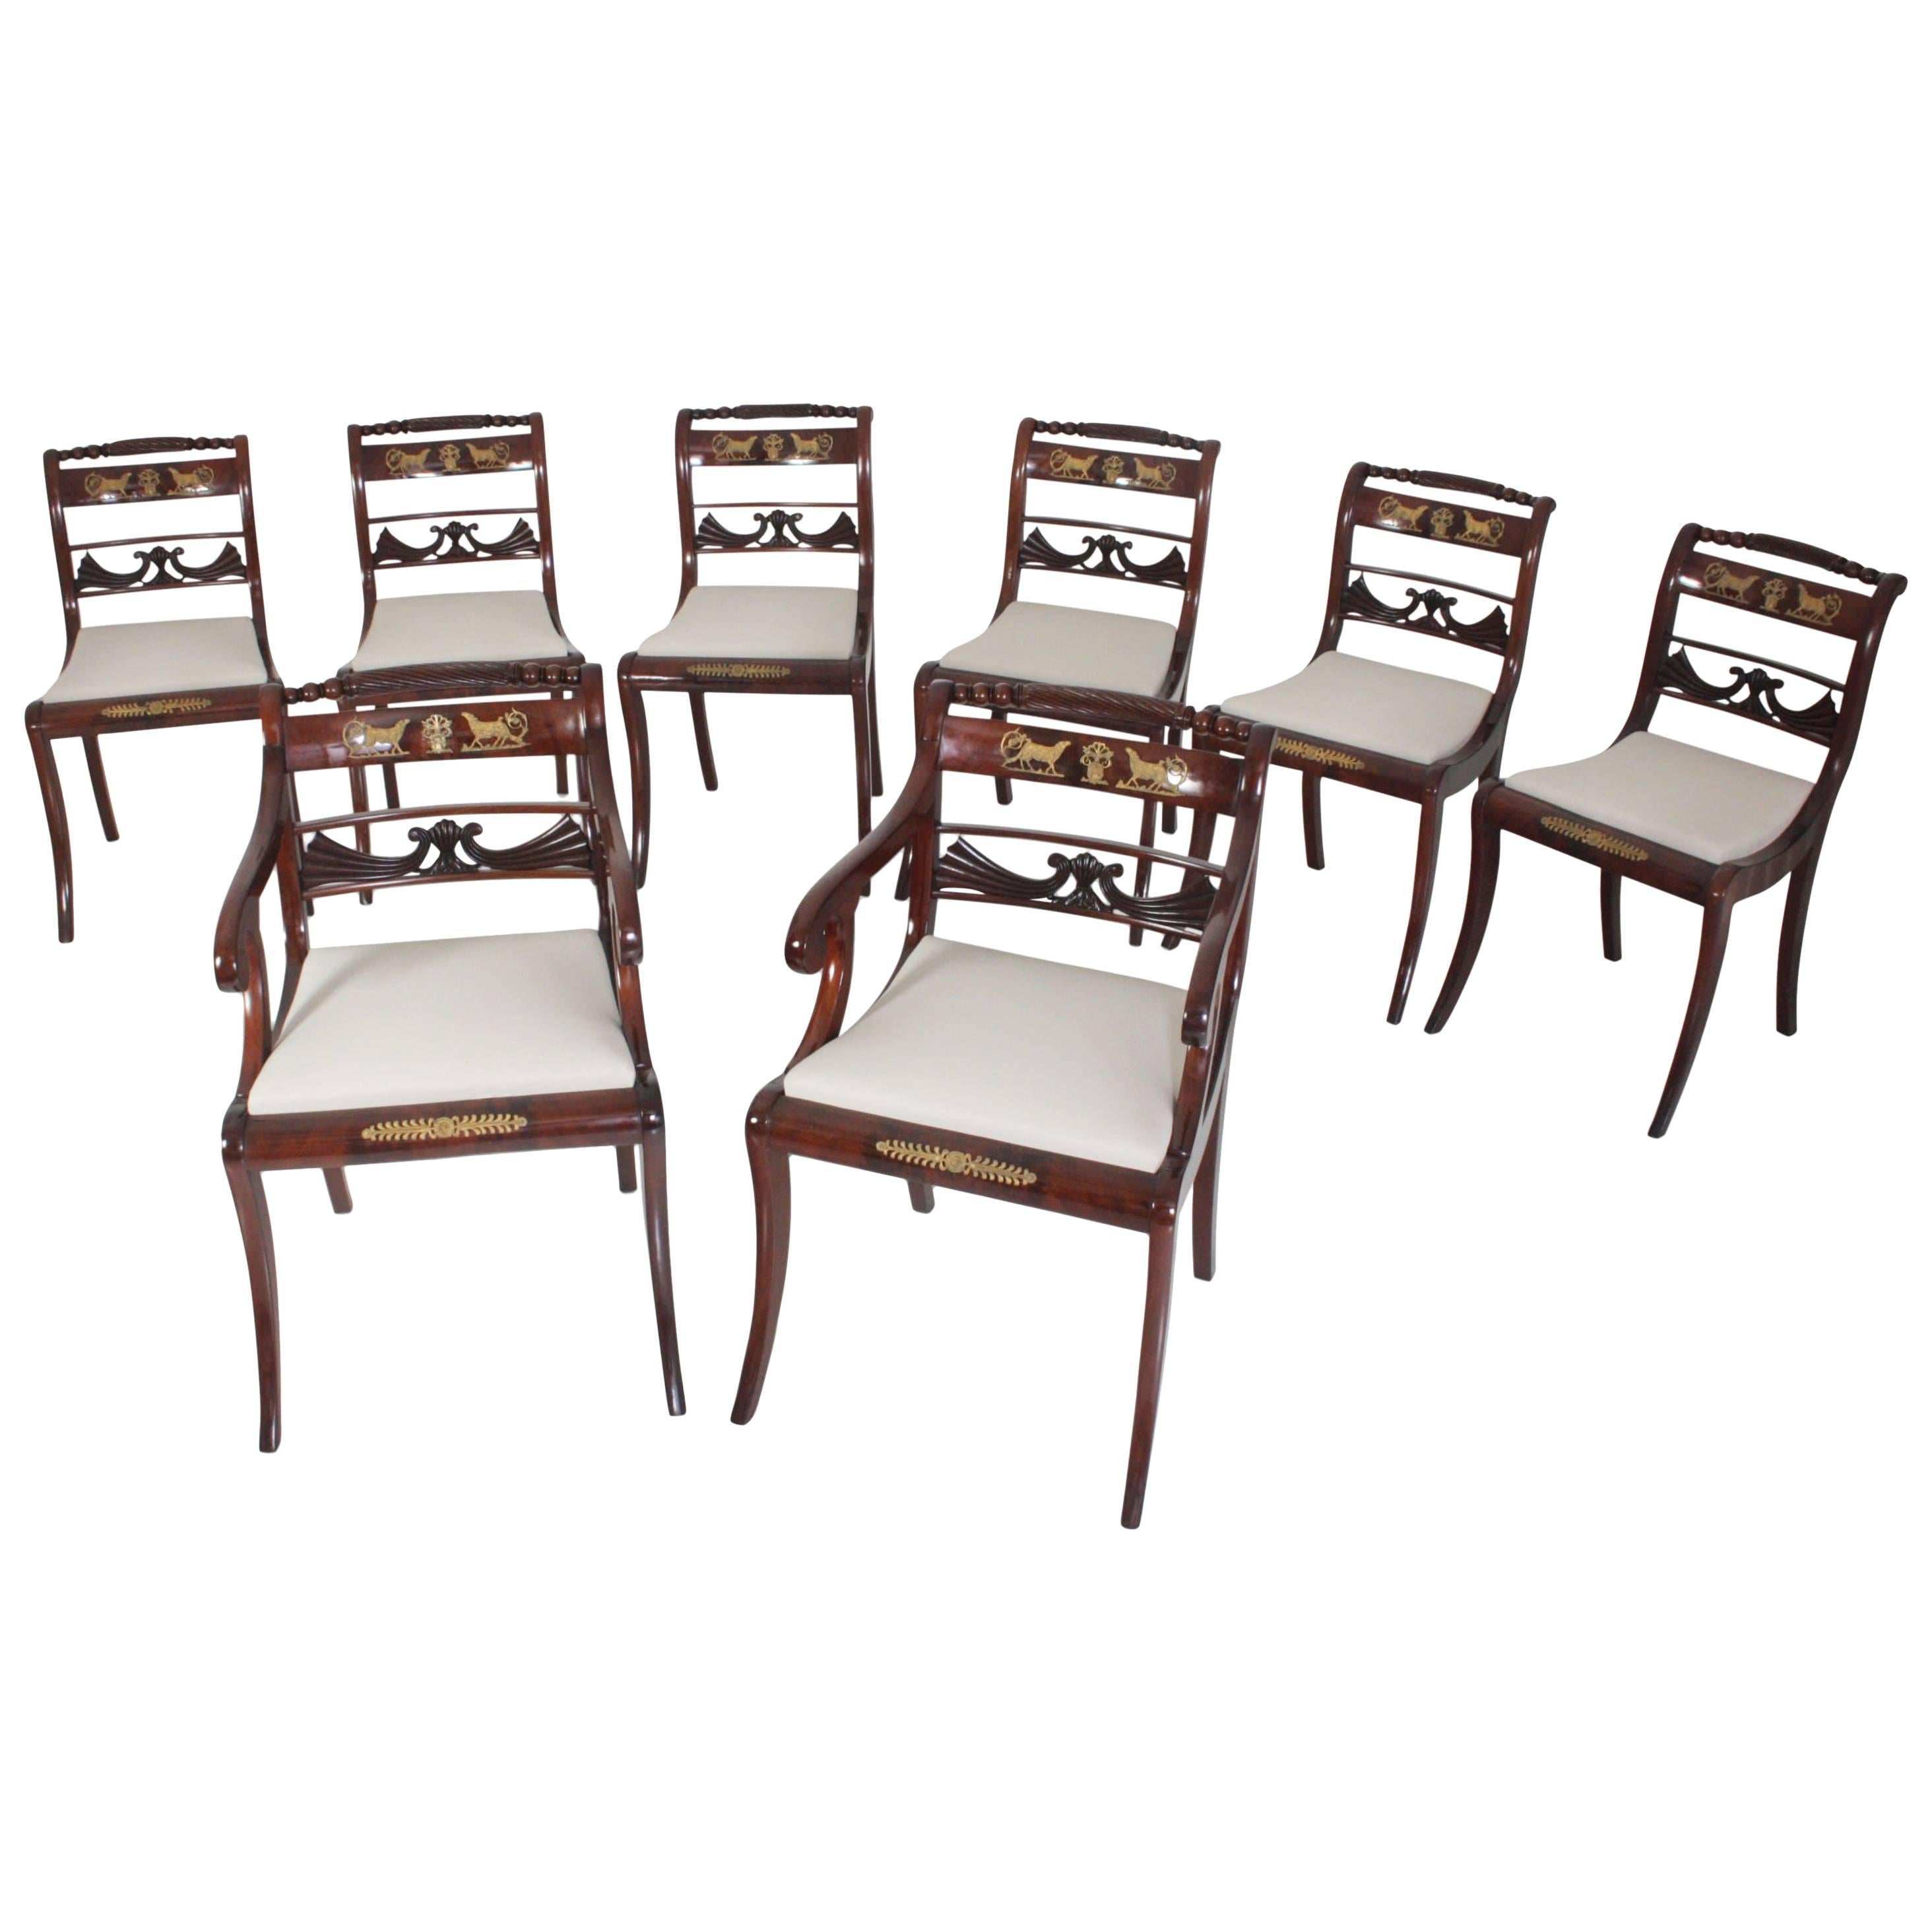 Set of Eight Dining Room Chairs and Armchairs, Northern Germany, circa 1830